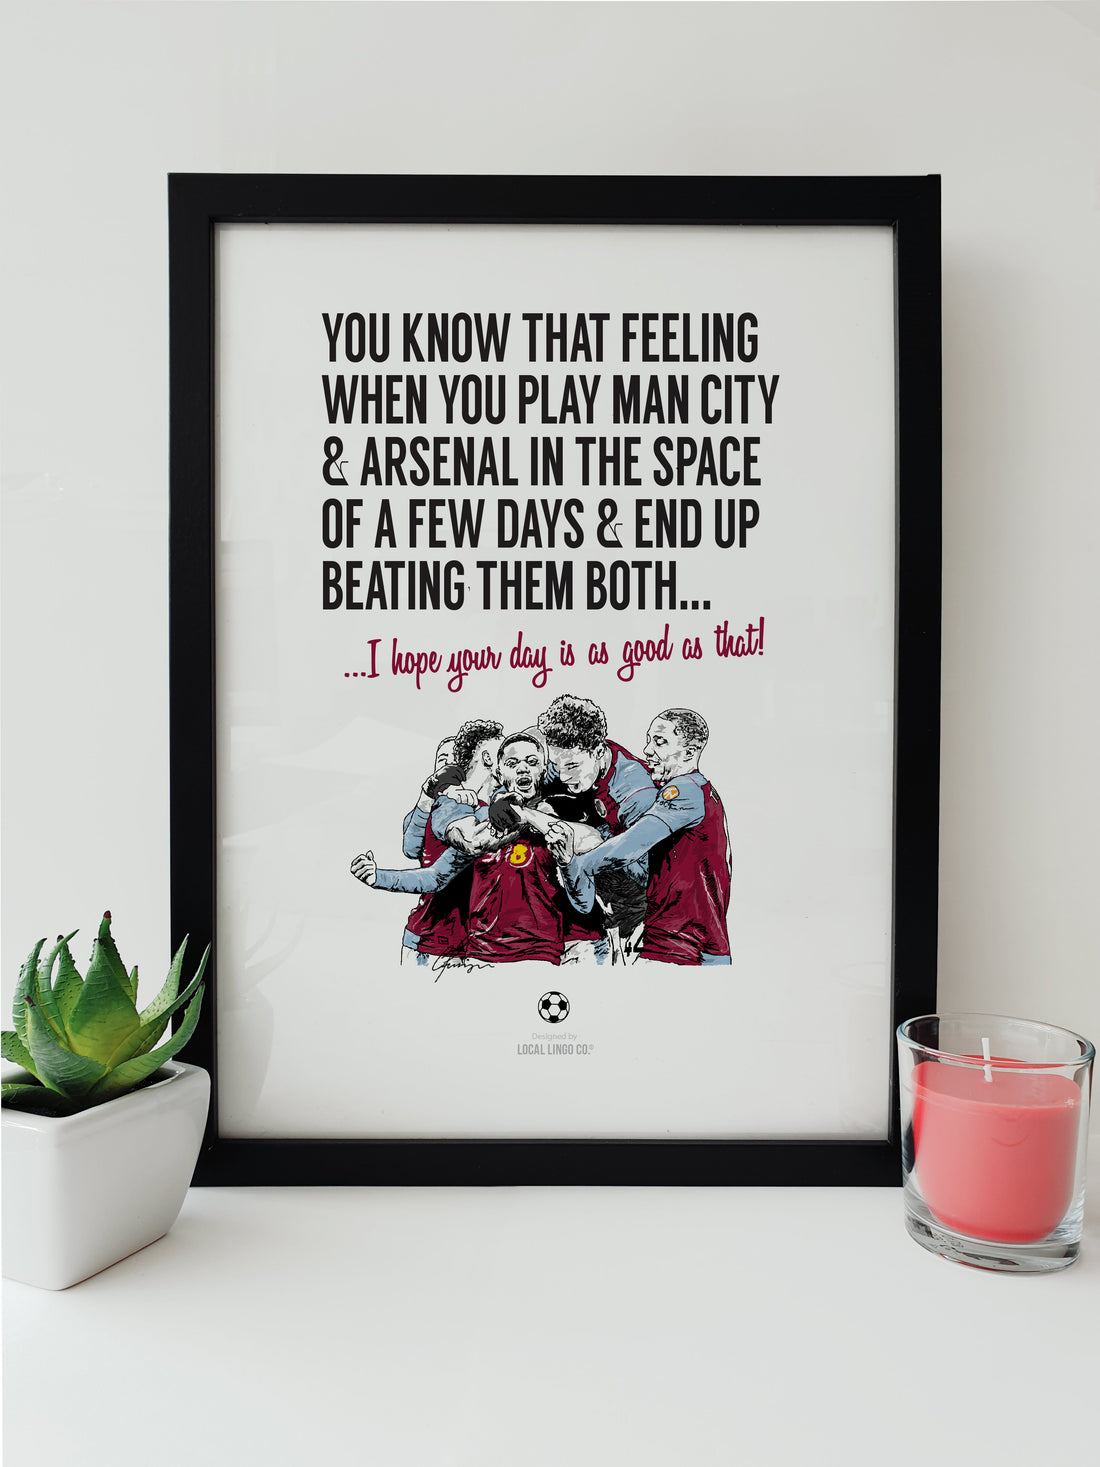 Local Lingo's Aston Villa-themed Christmas card celebrating wins over Man City and Arsenal, with players in a joyous huddle and a seasonal wish for a day as good as winning.